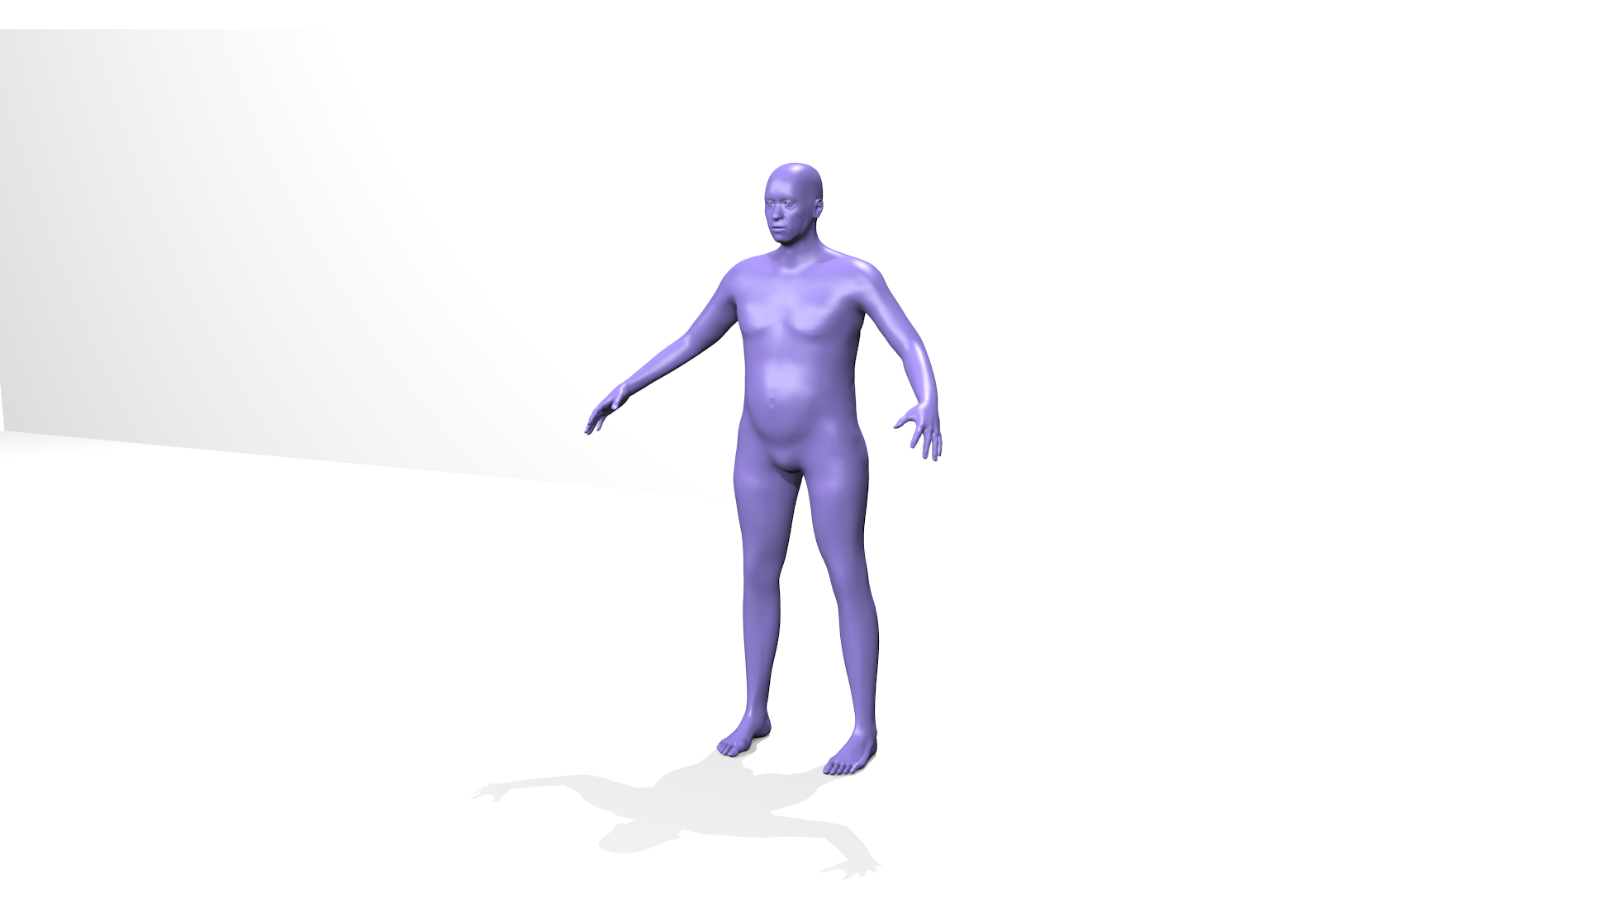 Bold Metrics' Metaverse-ready Body Data NFT™ for apparel brands and shoppers